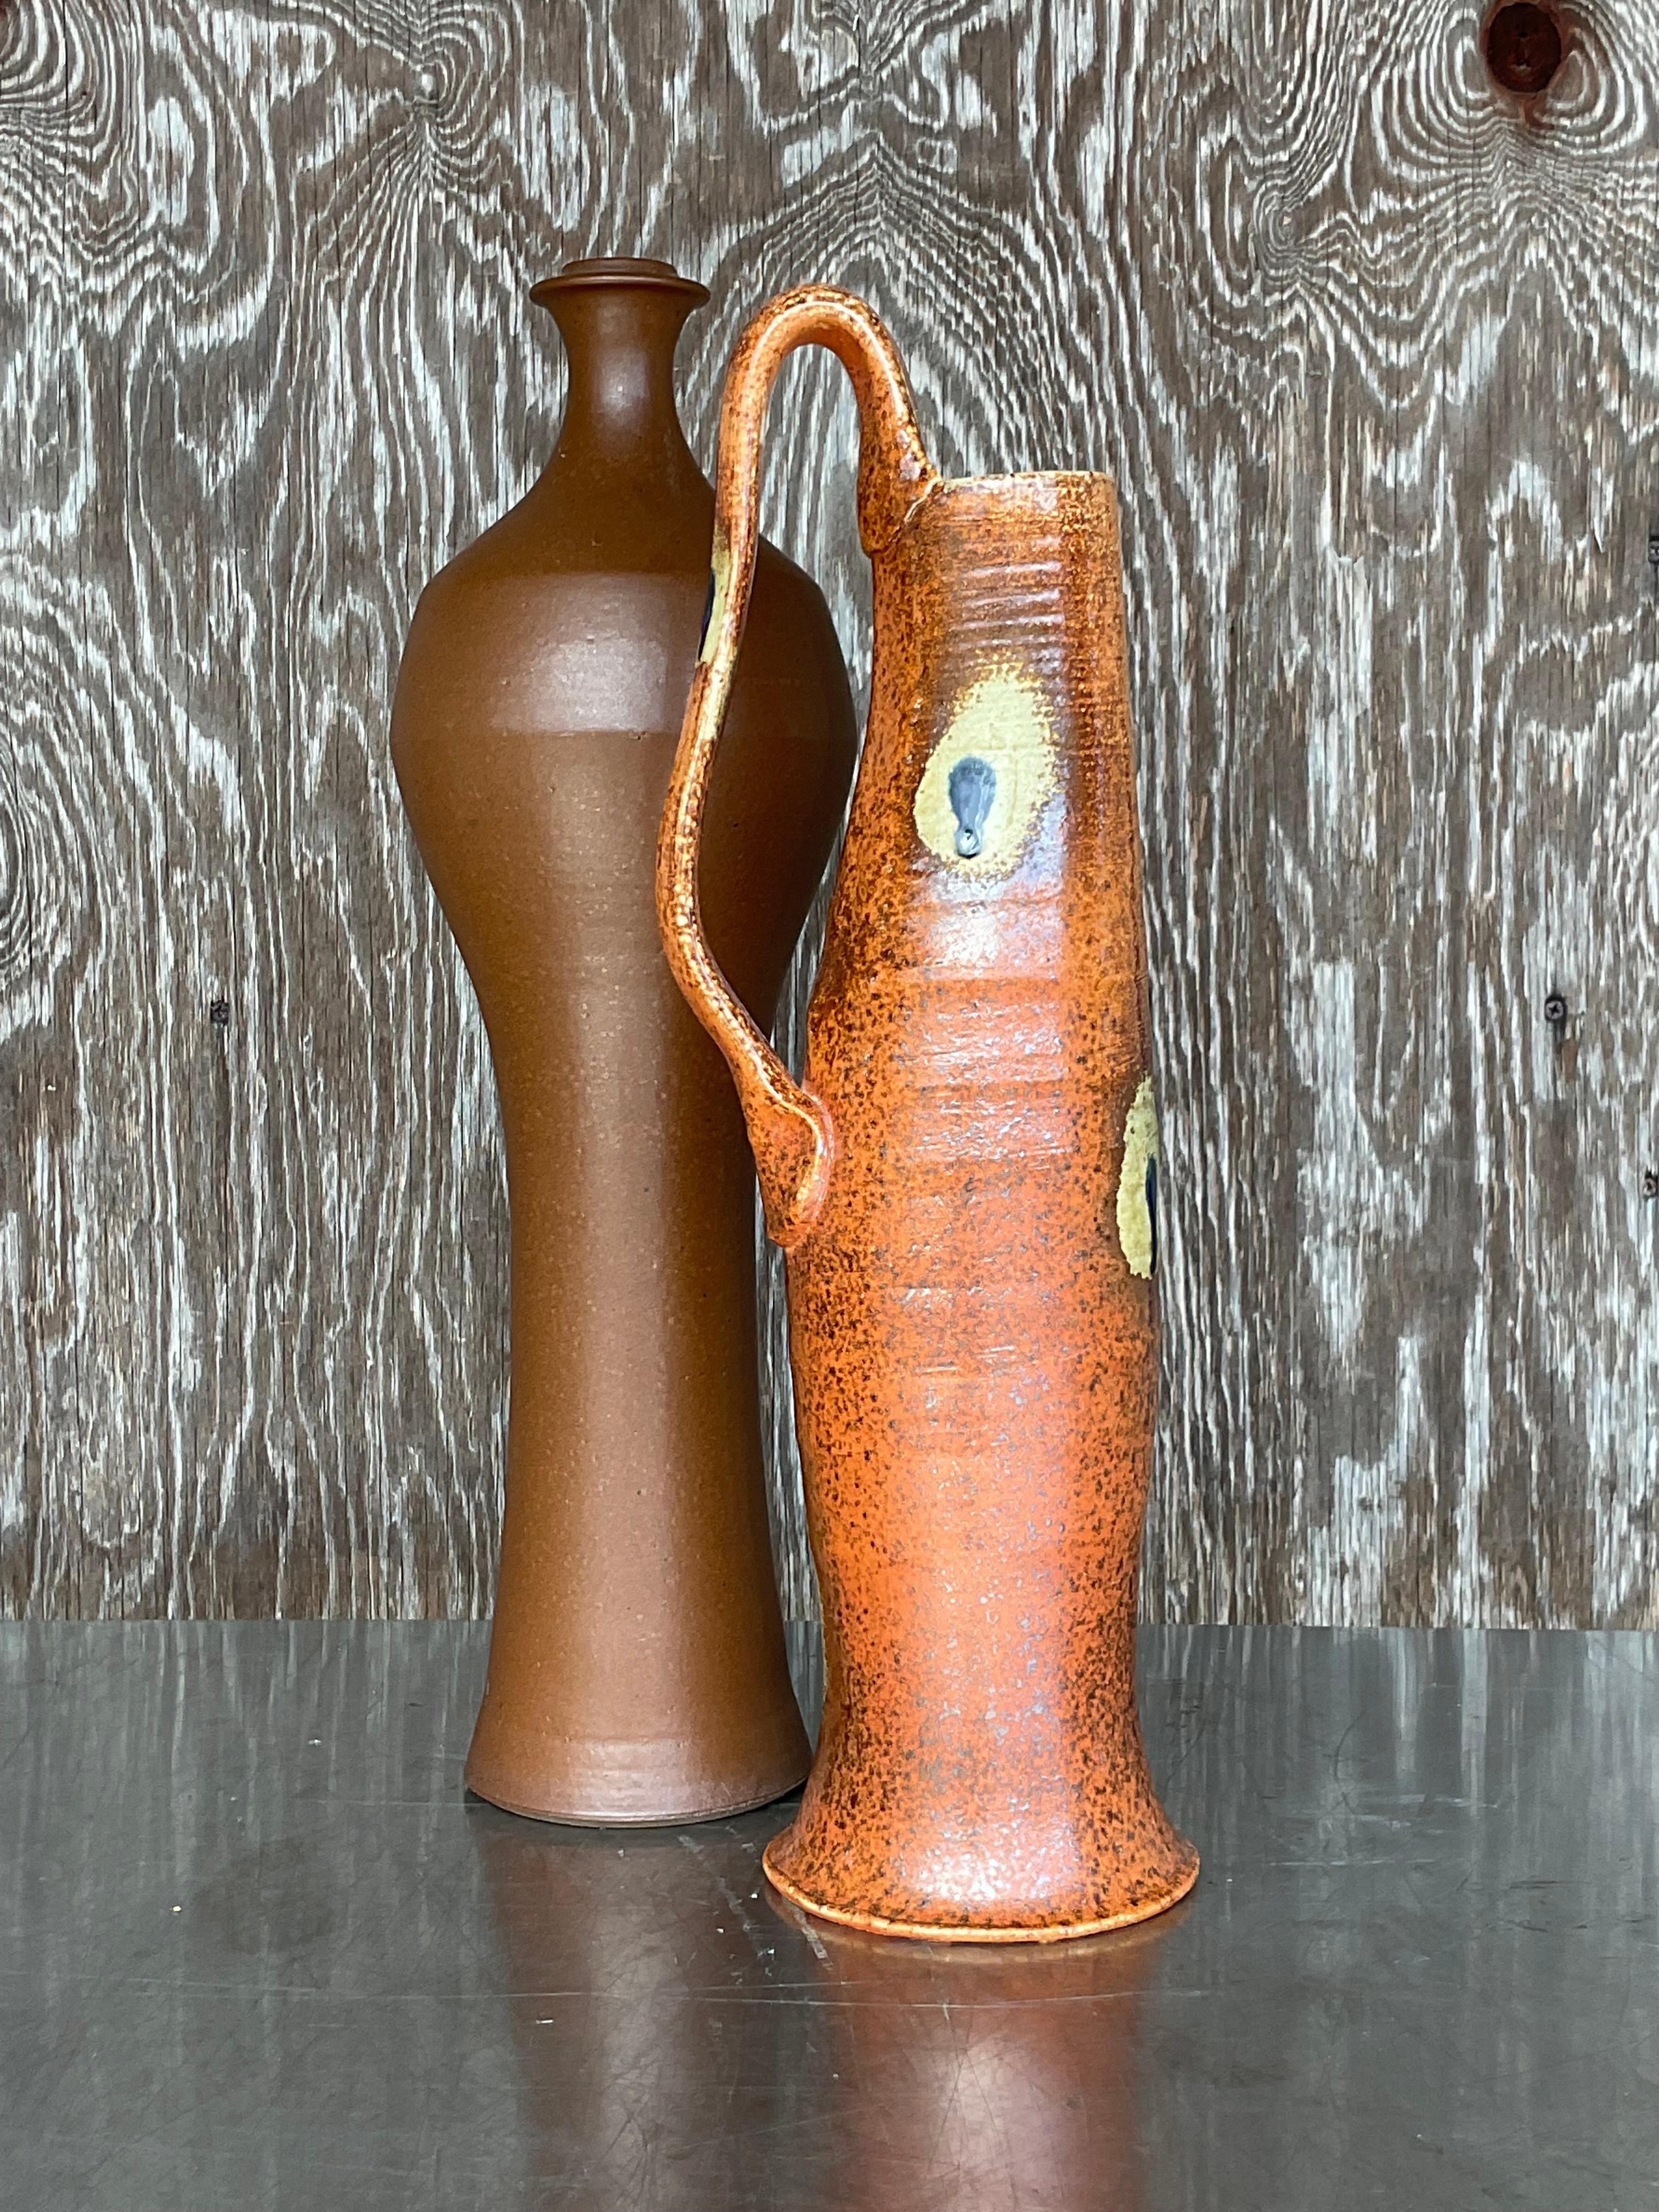 Vintage Boho Studio Pottery Vases - Set of 2 In Good Condition For Sale In west palm beach, FL